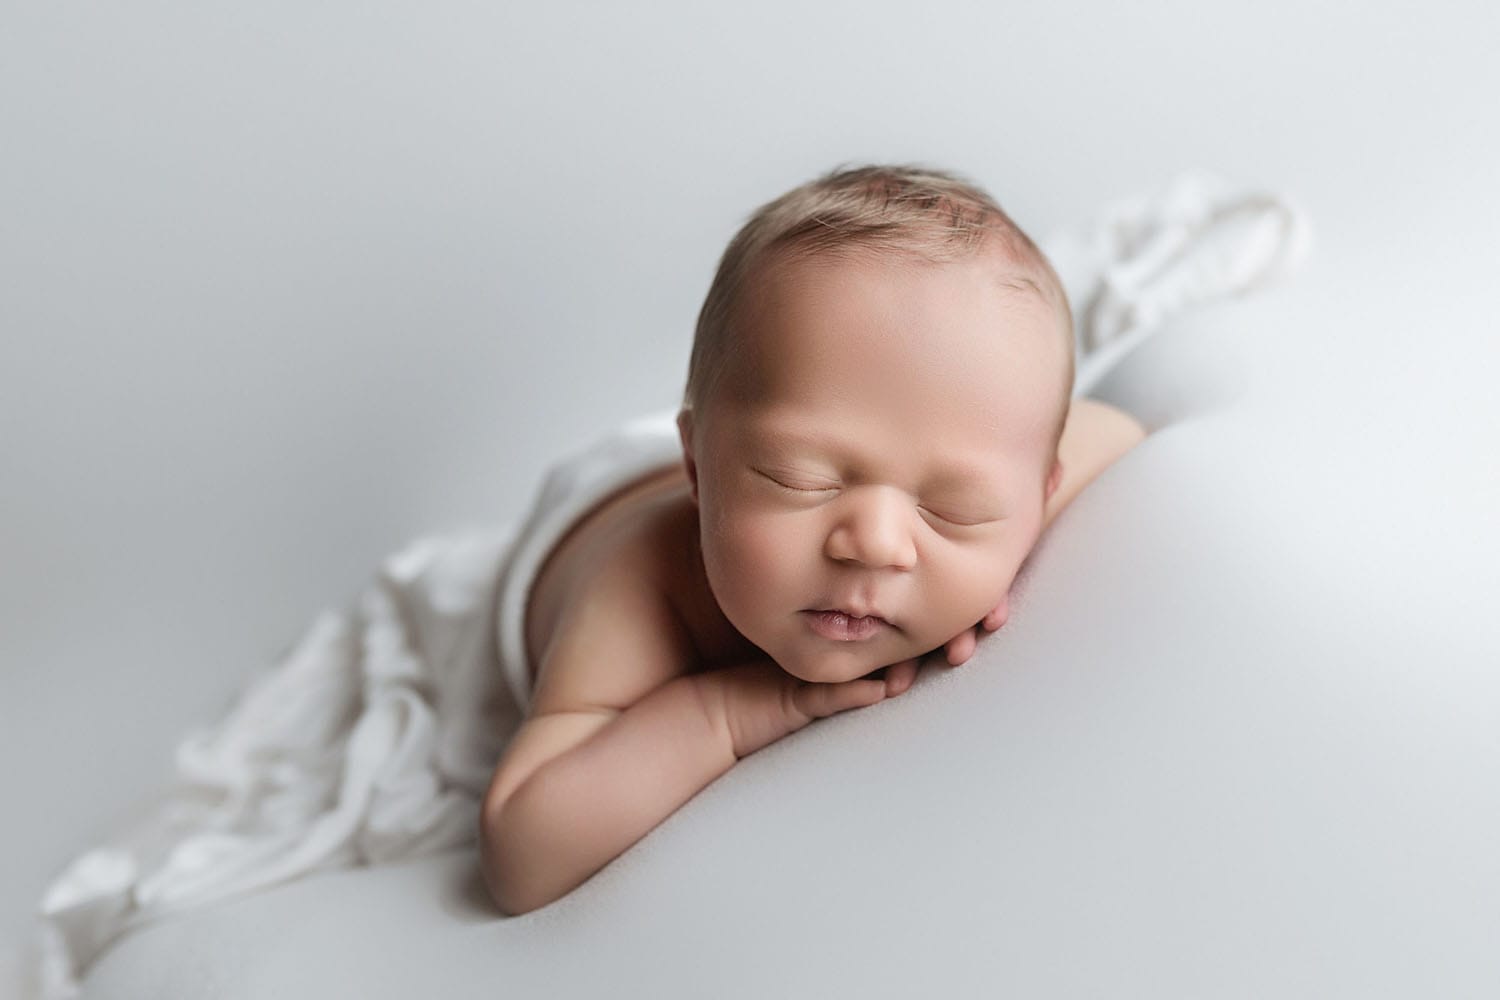 A baby boy in the studio laying on a white backdrop with fabric draped over his back posed with his chin resting on his hands.